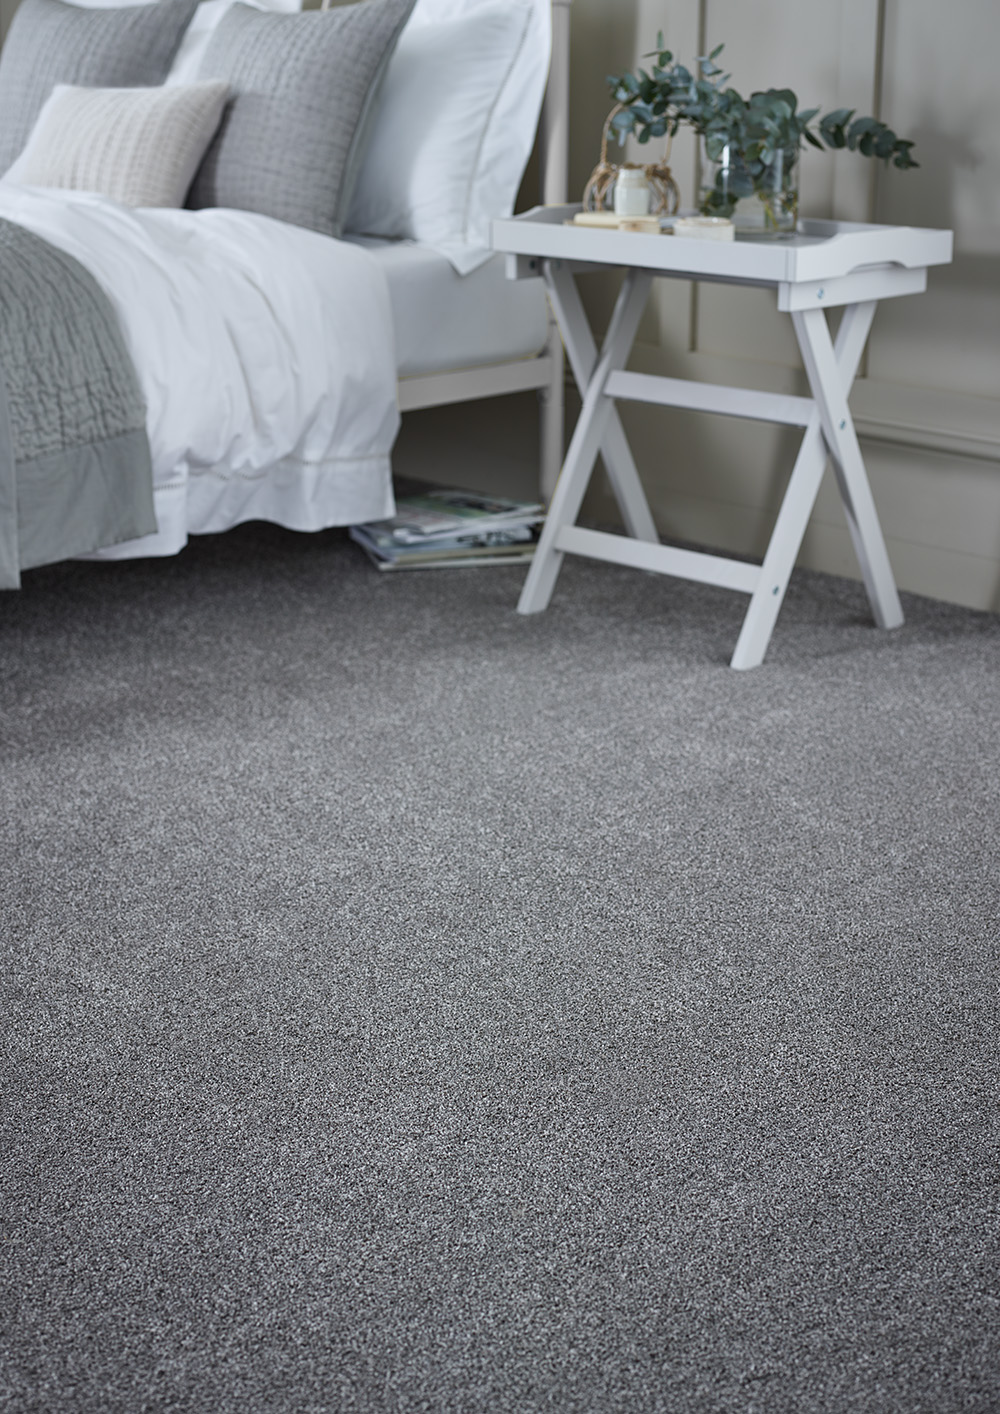 Highland Saxony -  a new, luxury, heavyweight stain resistant heather carpet from Cormar